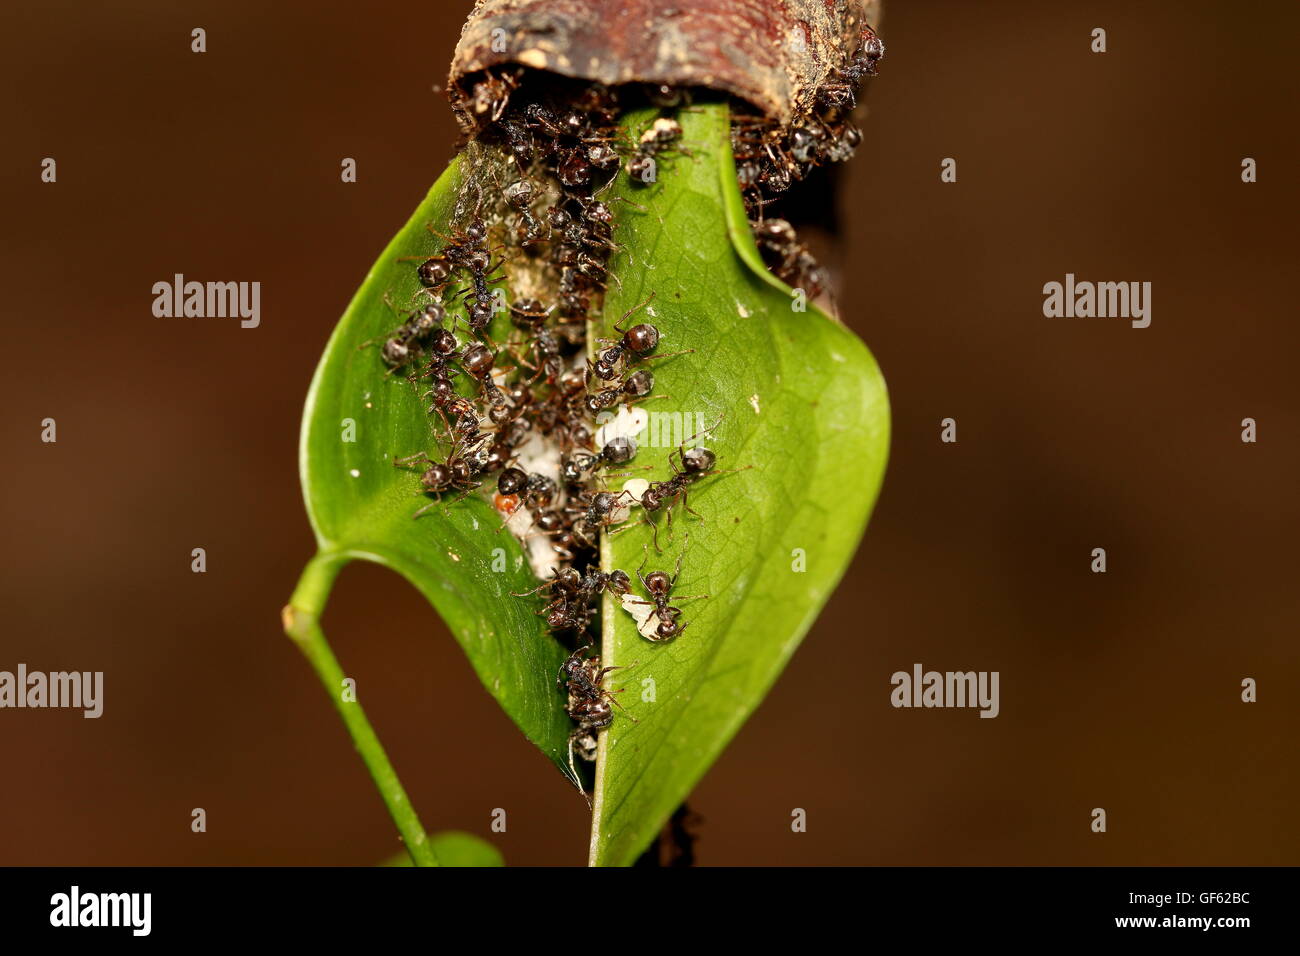 Ants colony feeding on the nymphs of another insect. Stock Photo